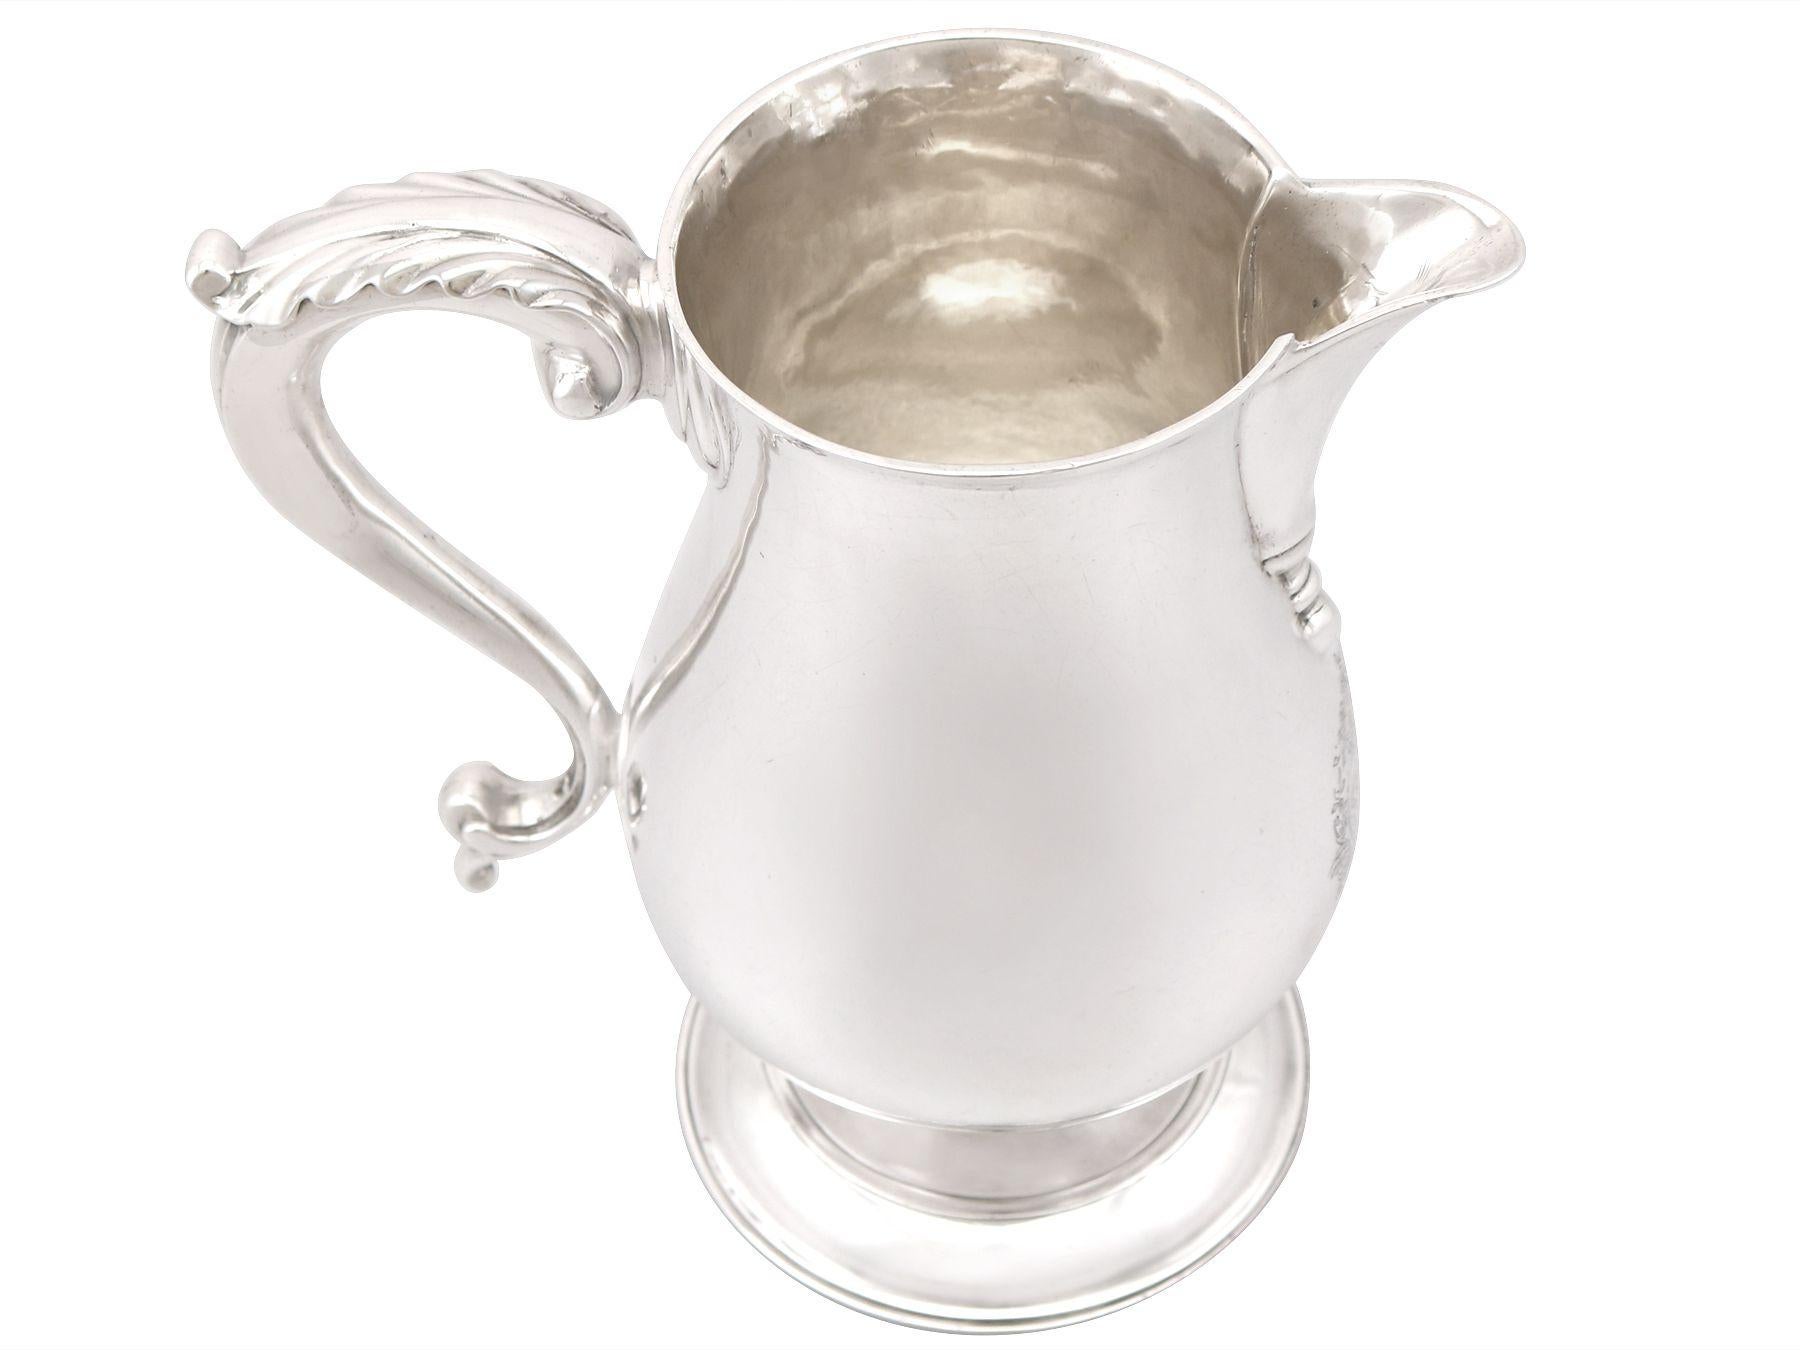 An exceptional, fine and impressive antique George III English sterling silver beer/water jug; part of our dining silverware collection

This exceptional antique Georgian sterling silver beer jug has a plain baluster form onto a circular spreading